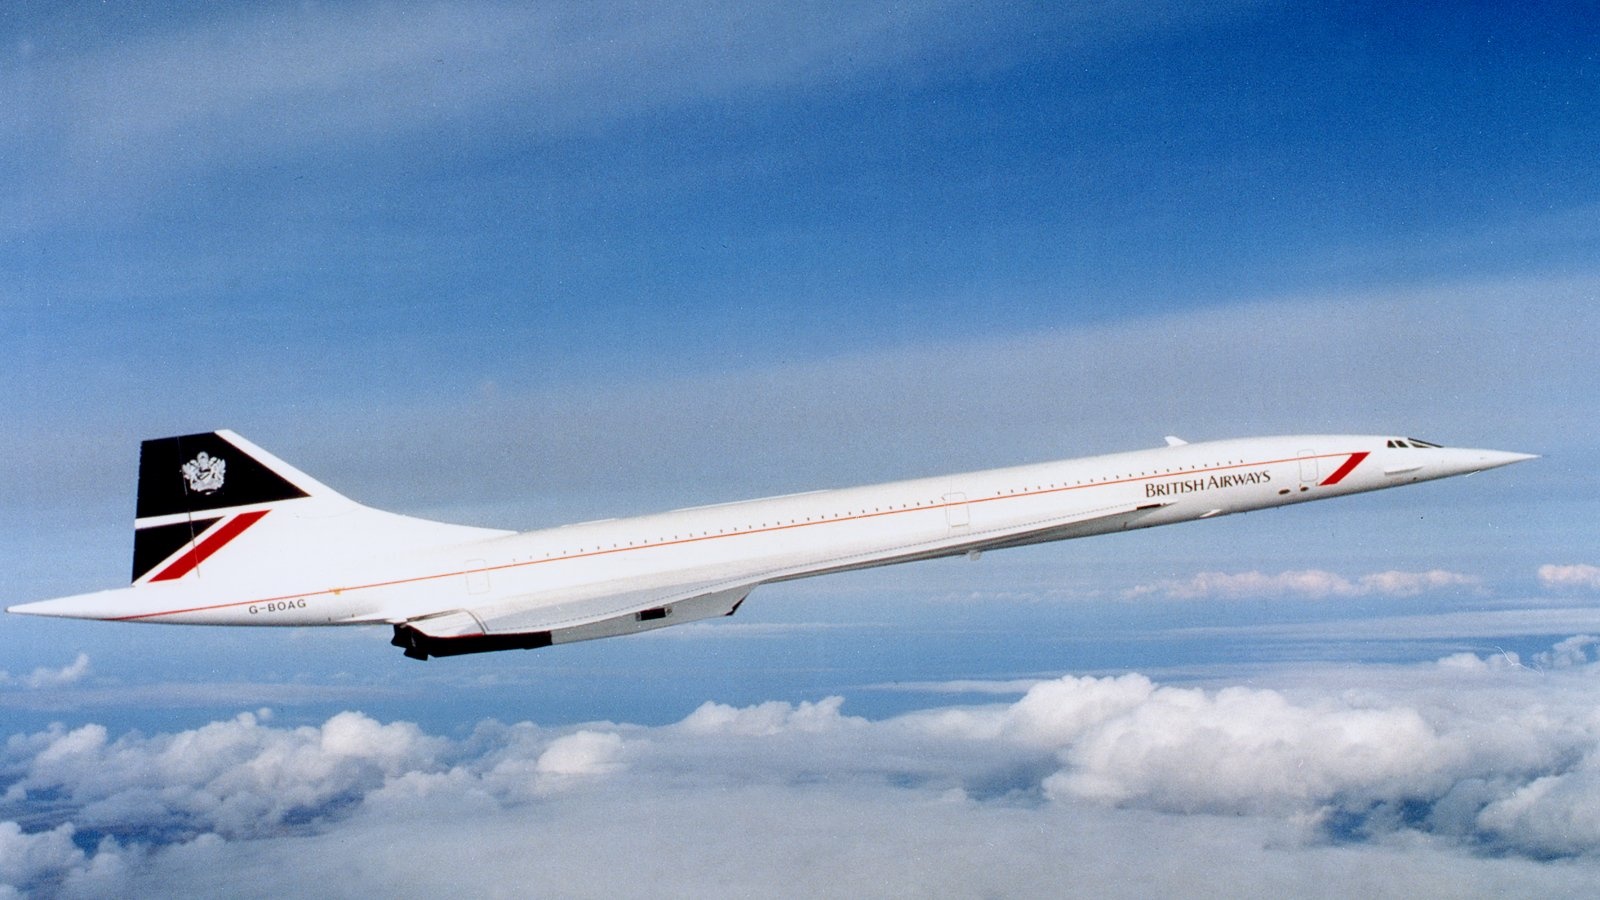 On March 2, 1969, The First Concorde Took To The Air - Concorde Flight - HD Wallpaper 